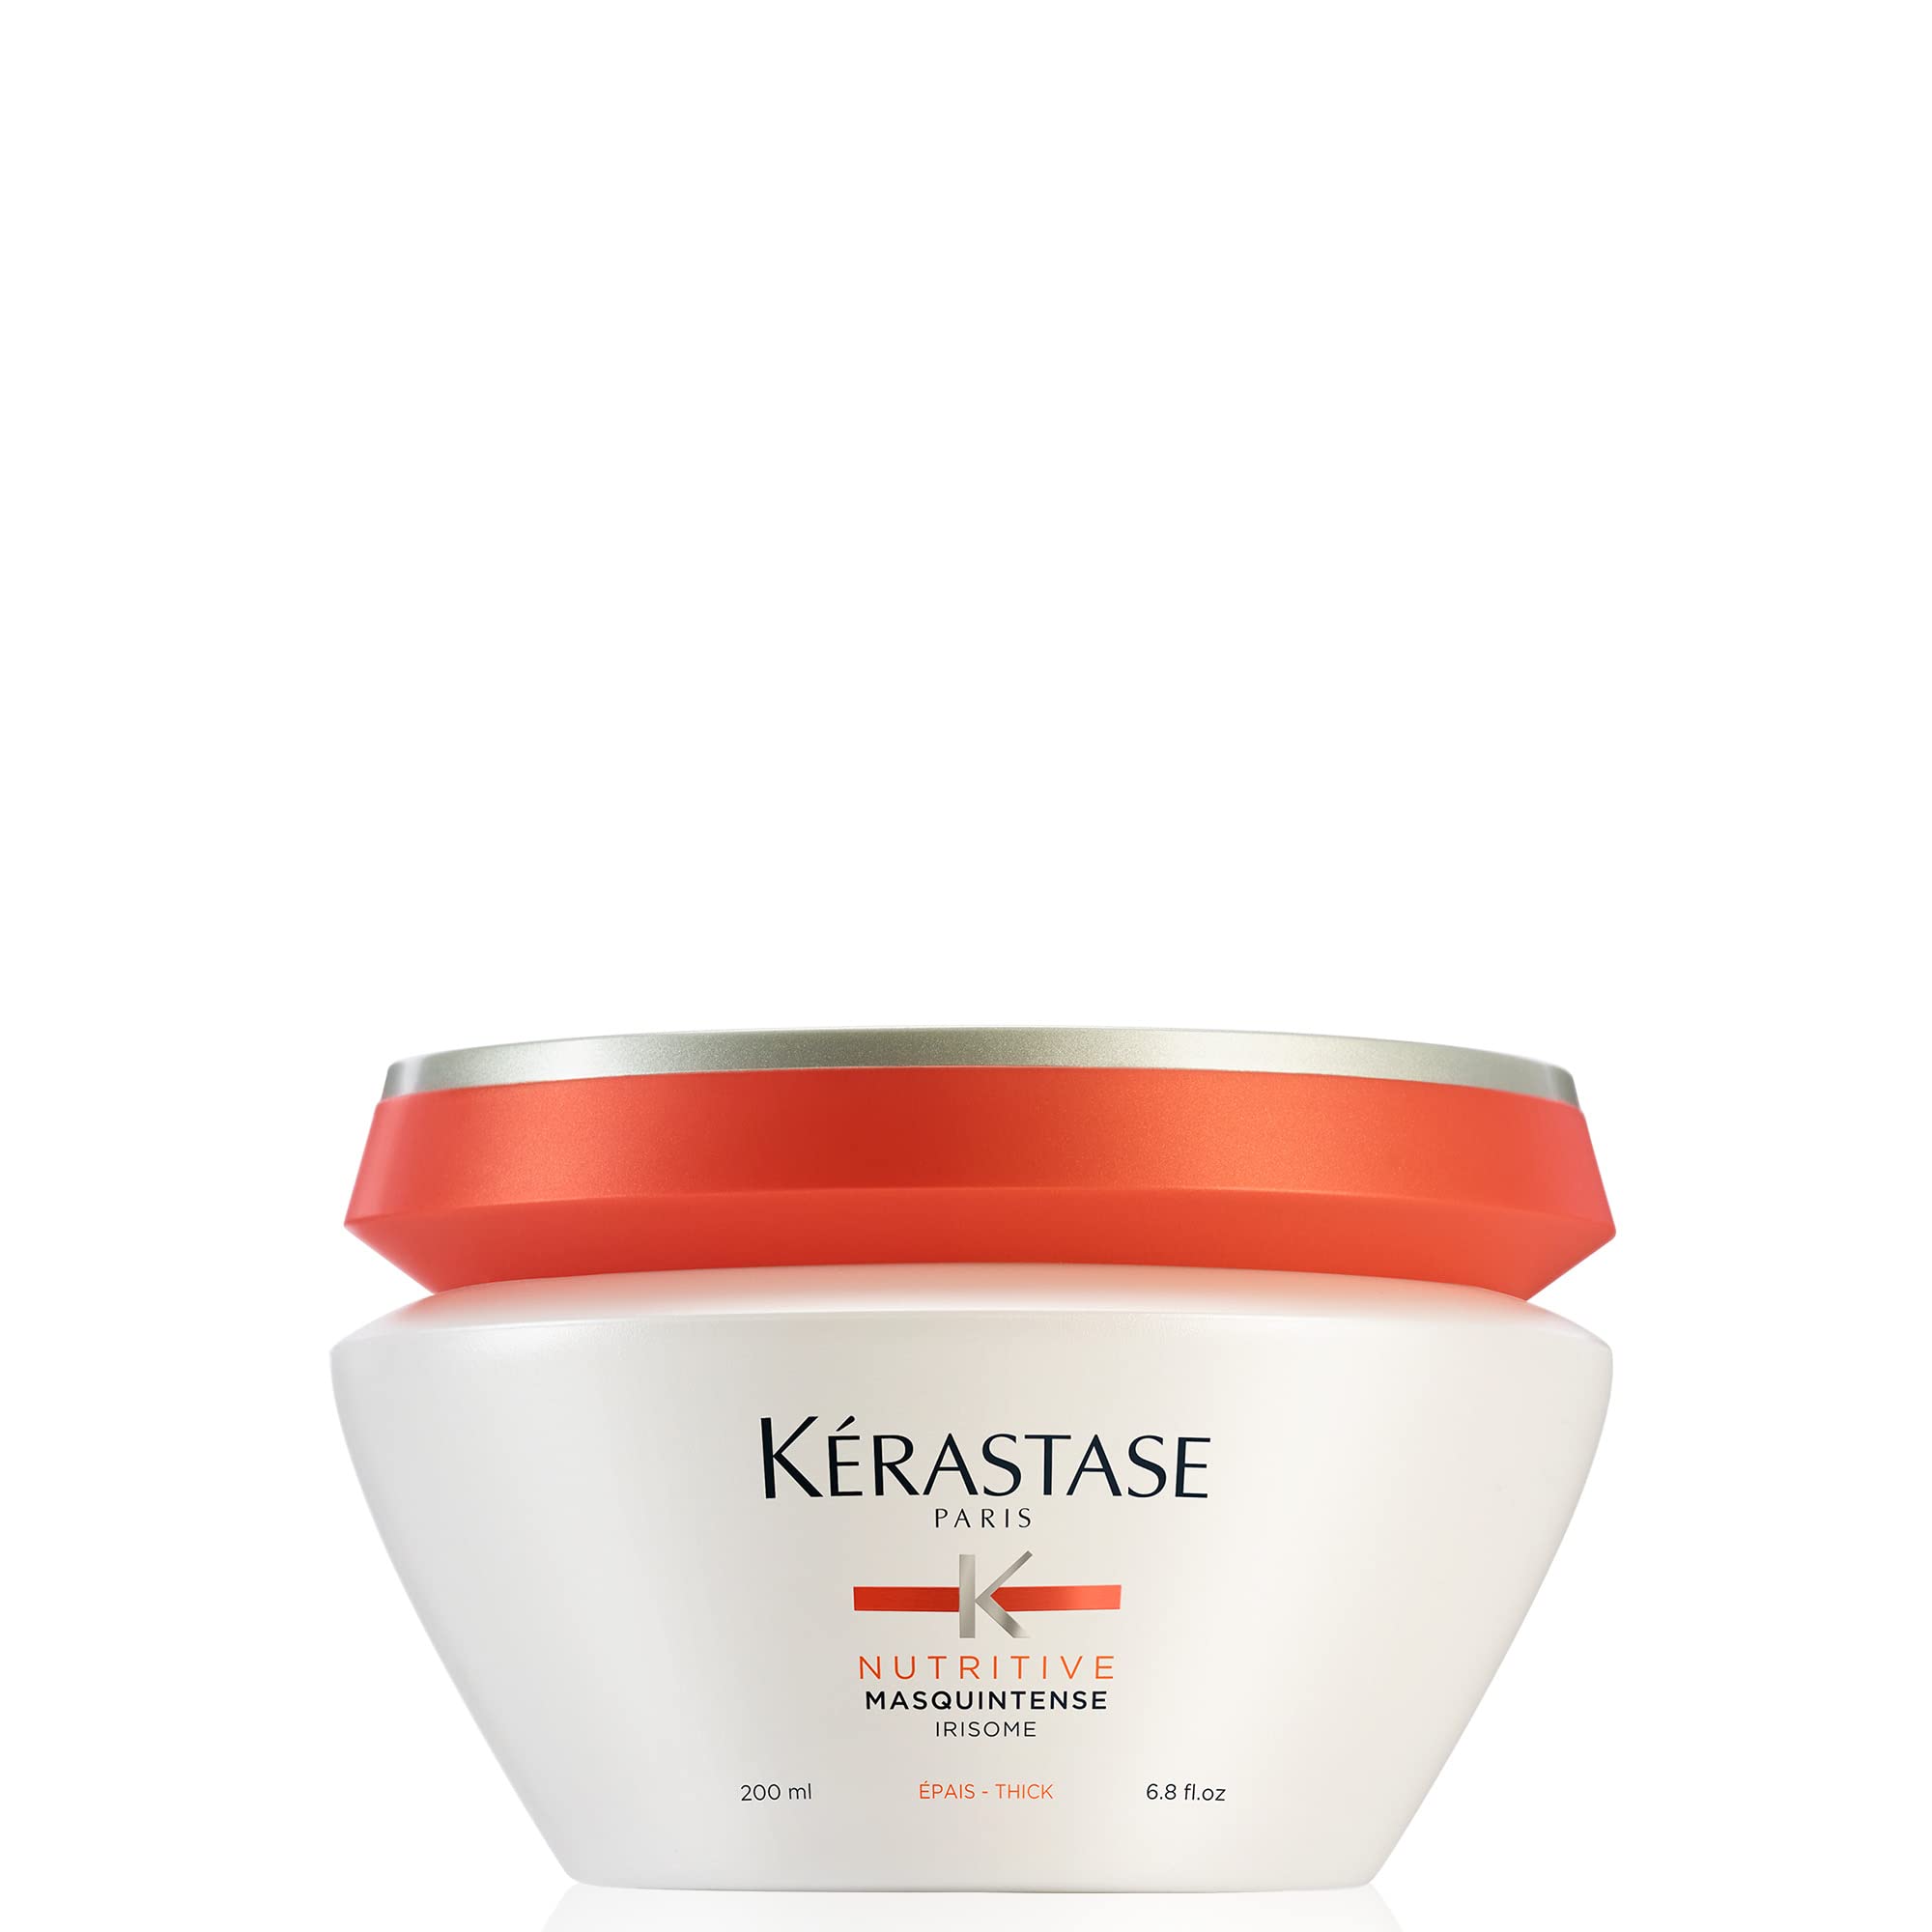 KERASTASE Nutritive Nourishing Mask | Moisturizes and Conditions | For Medium to Thick Hair | With Irisome Complex | Masquintense | Old Packaging | 6.8 Fl Oz